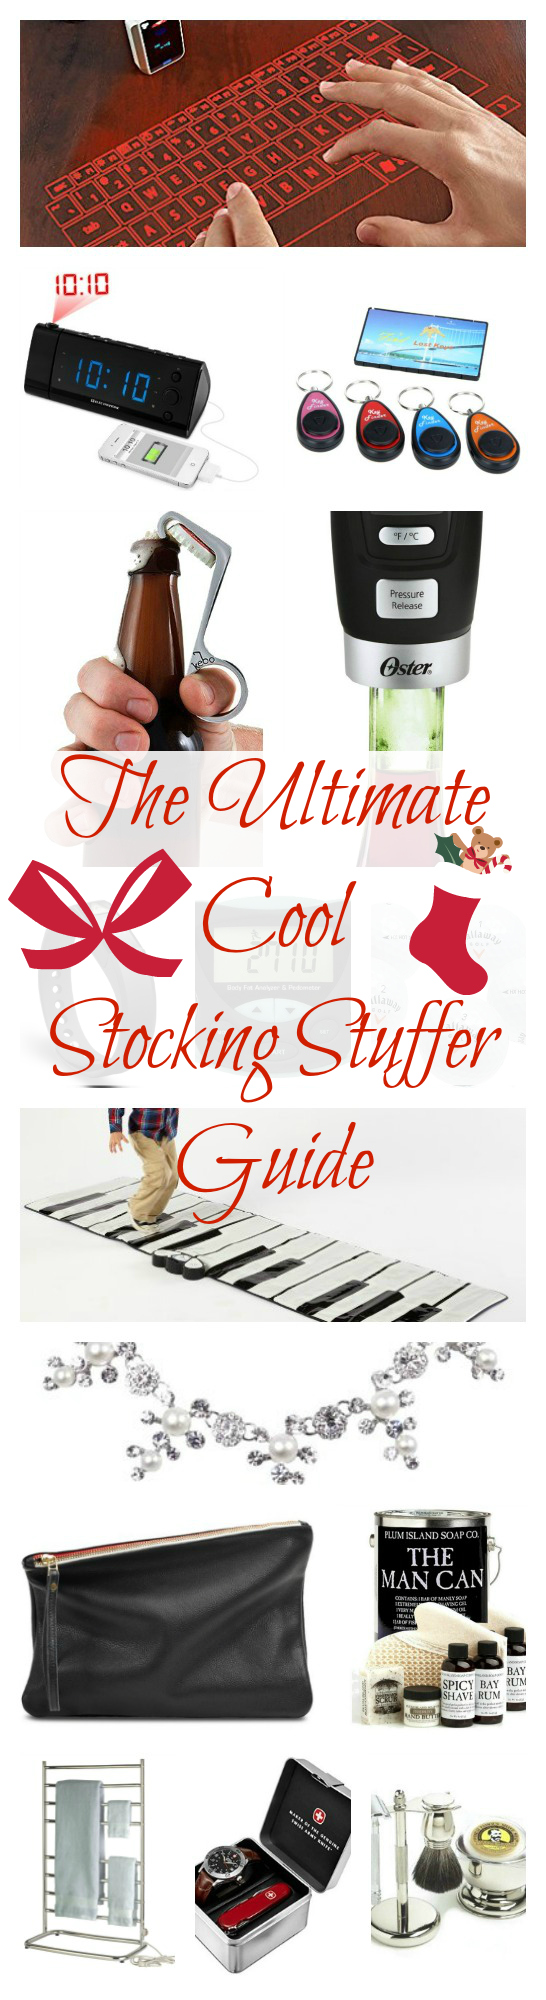 THE ULTIMATE COOL STOCKING STUFFER GUIDE! The coolest fun gadgets and accessories for man, woman, & child.